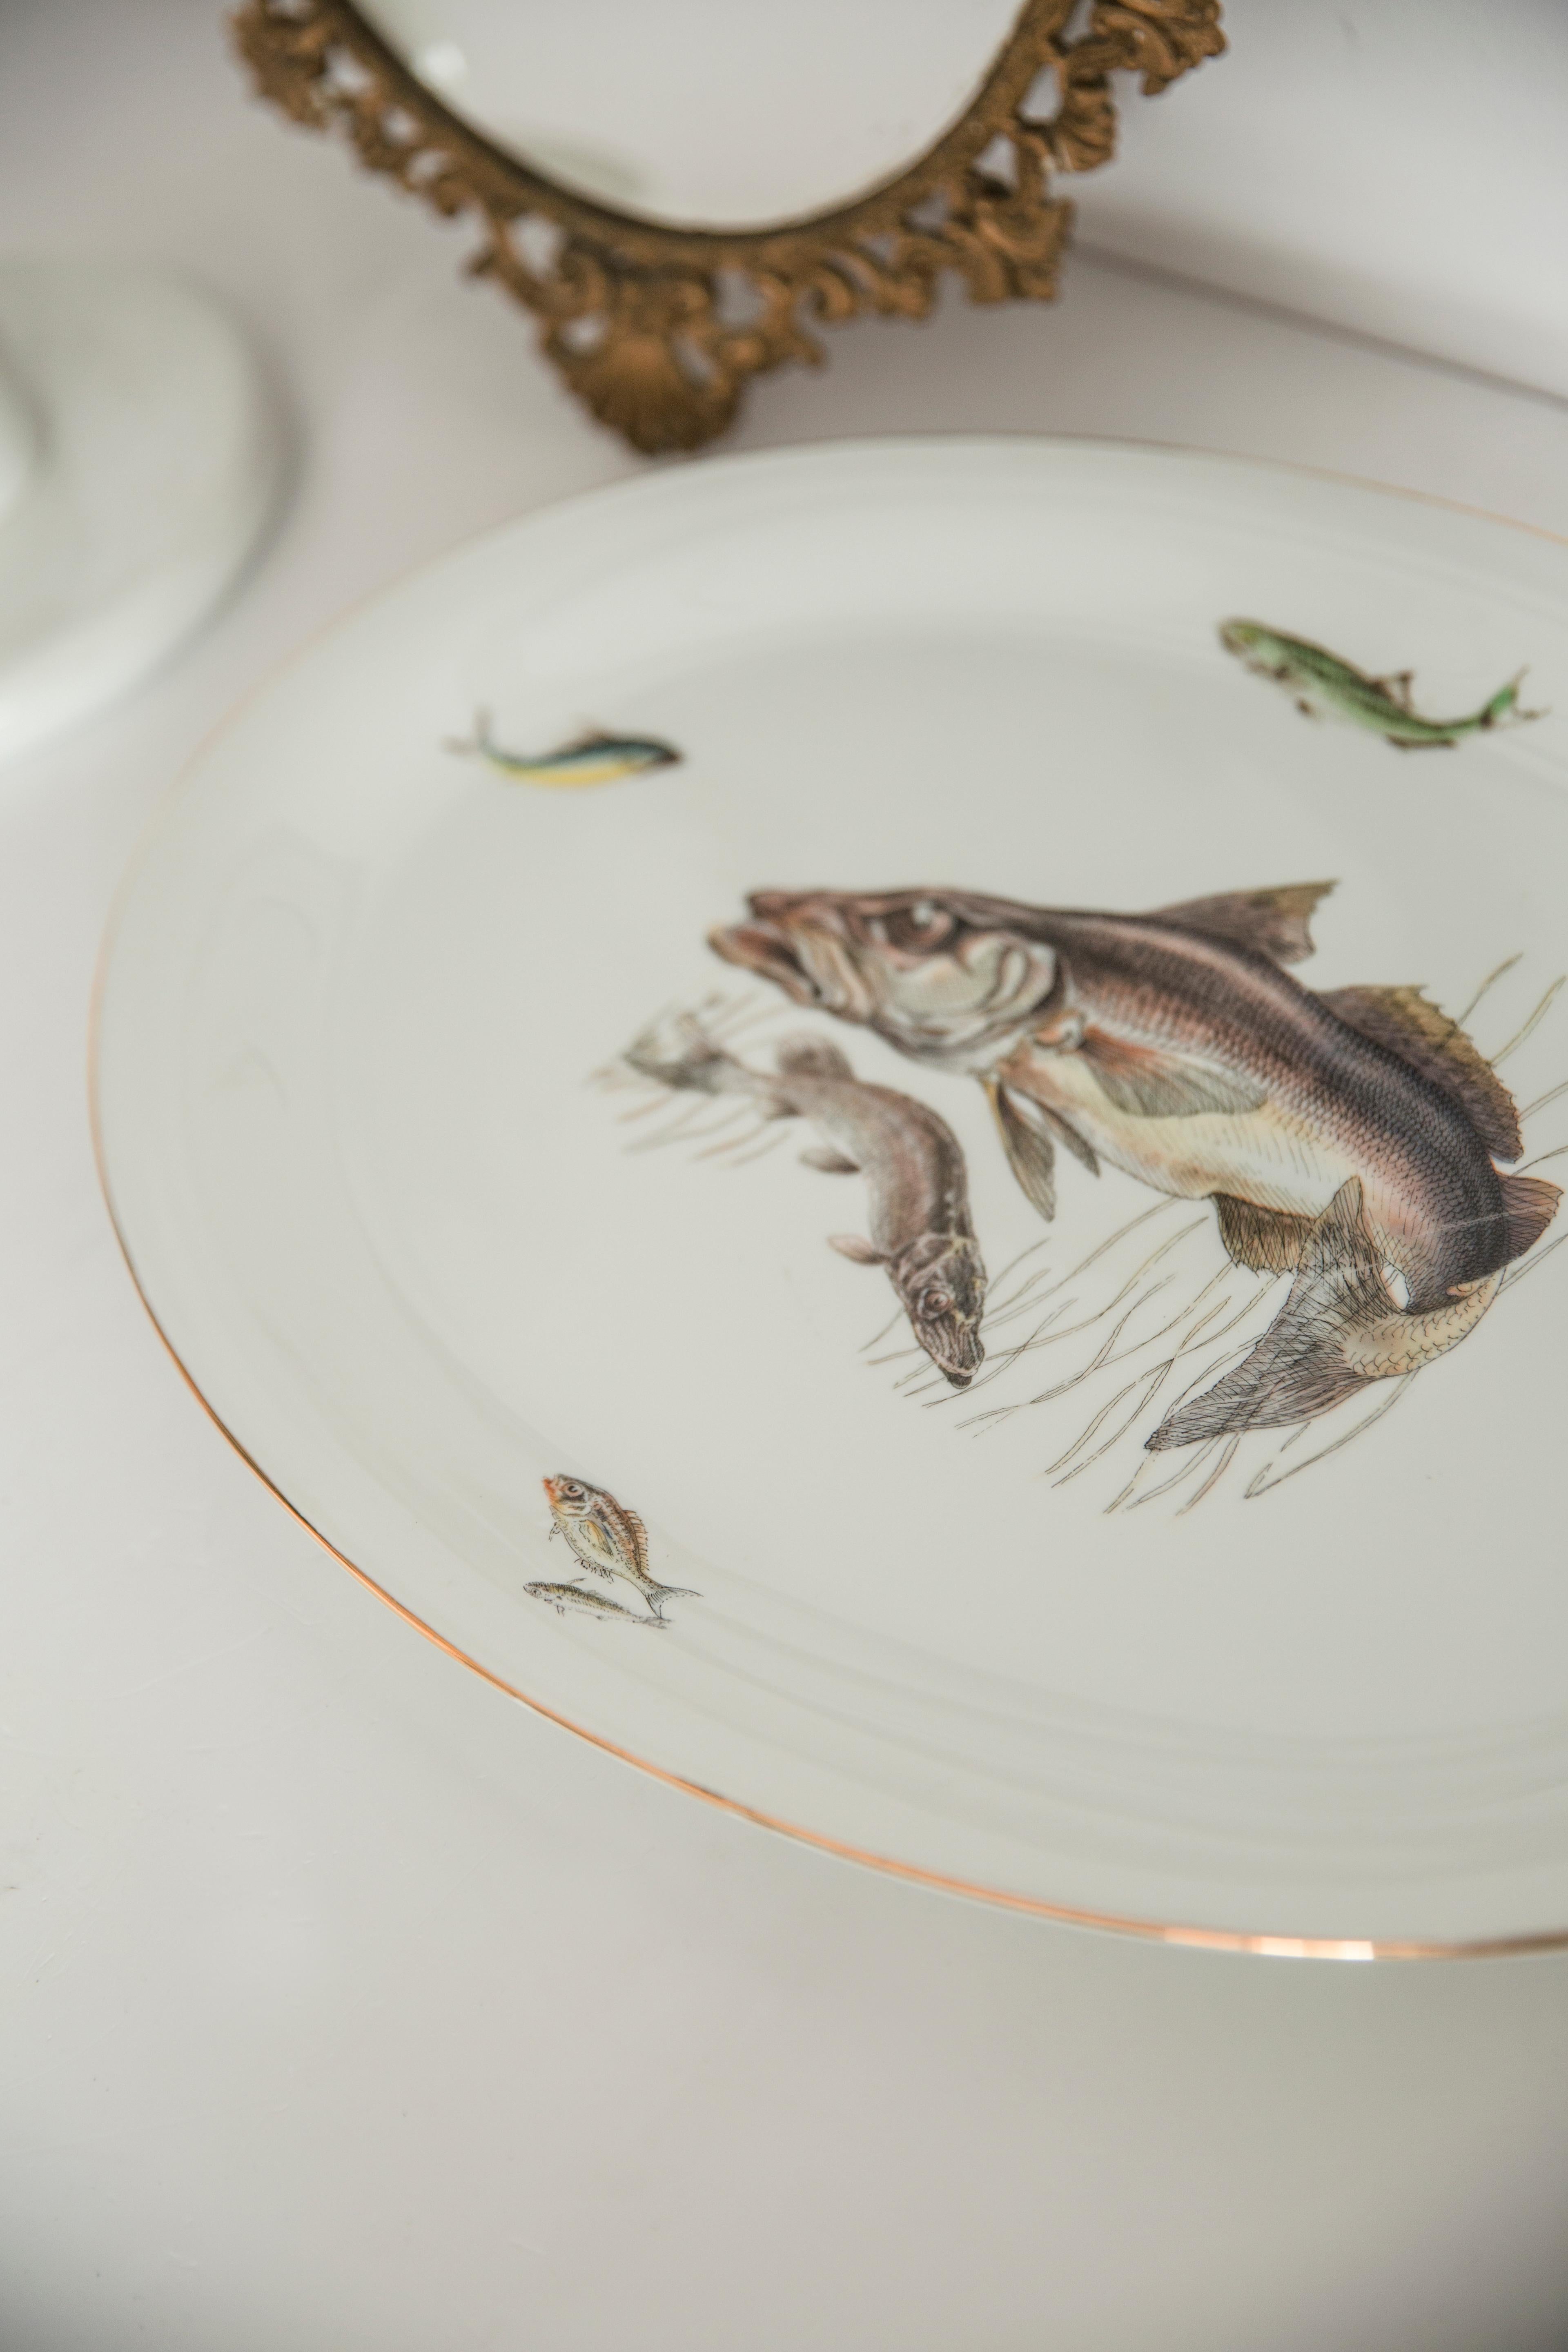 Decorative Fishes plate from Germany. Produced in 1970s.
Every plate is hand painted. Plate is in very good vintage condition, no damage or cracks. Original glass. Beautiful piece for every interior! Only one unique item.